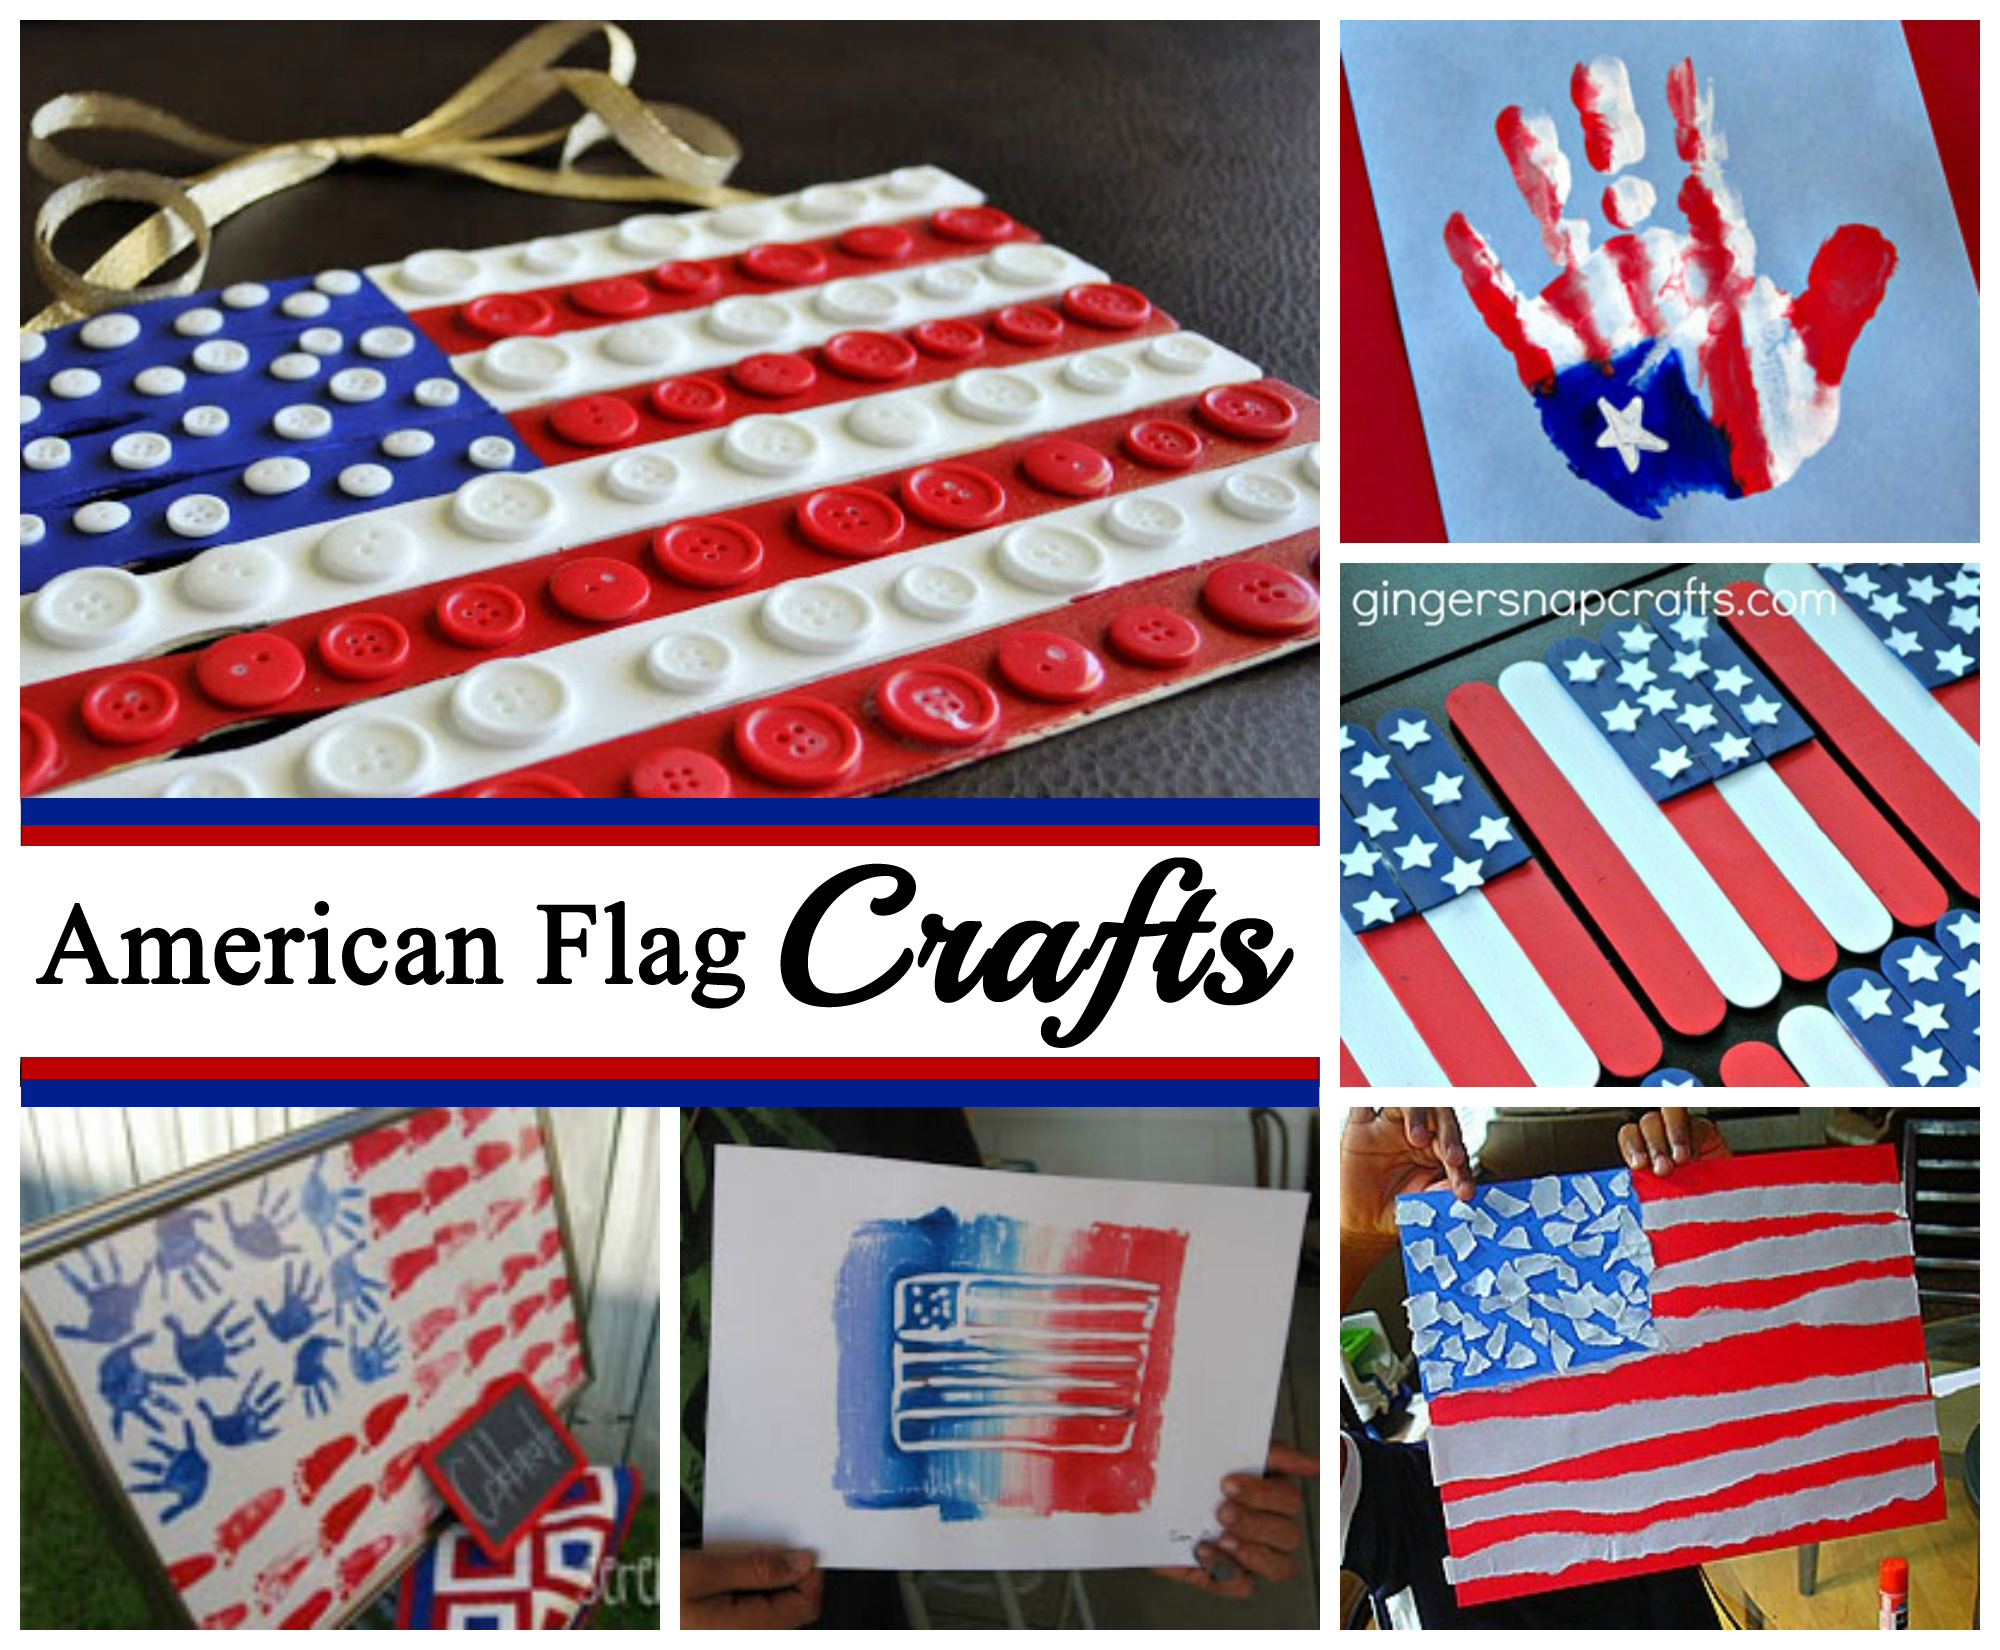 American Flag Crafts for July 4th